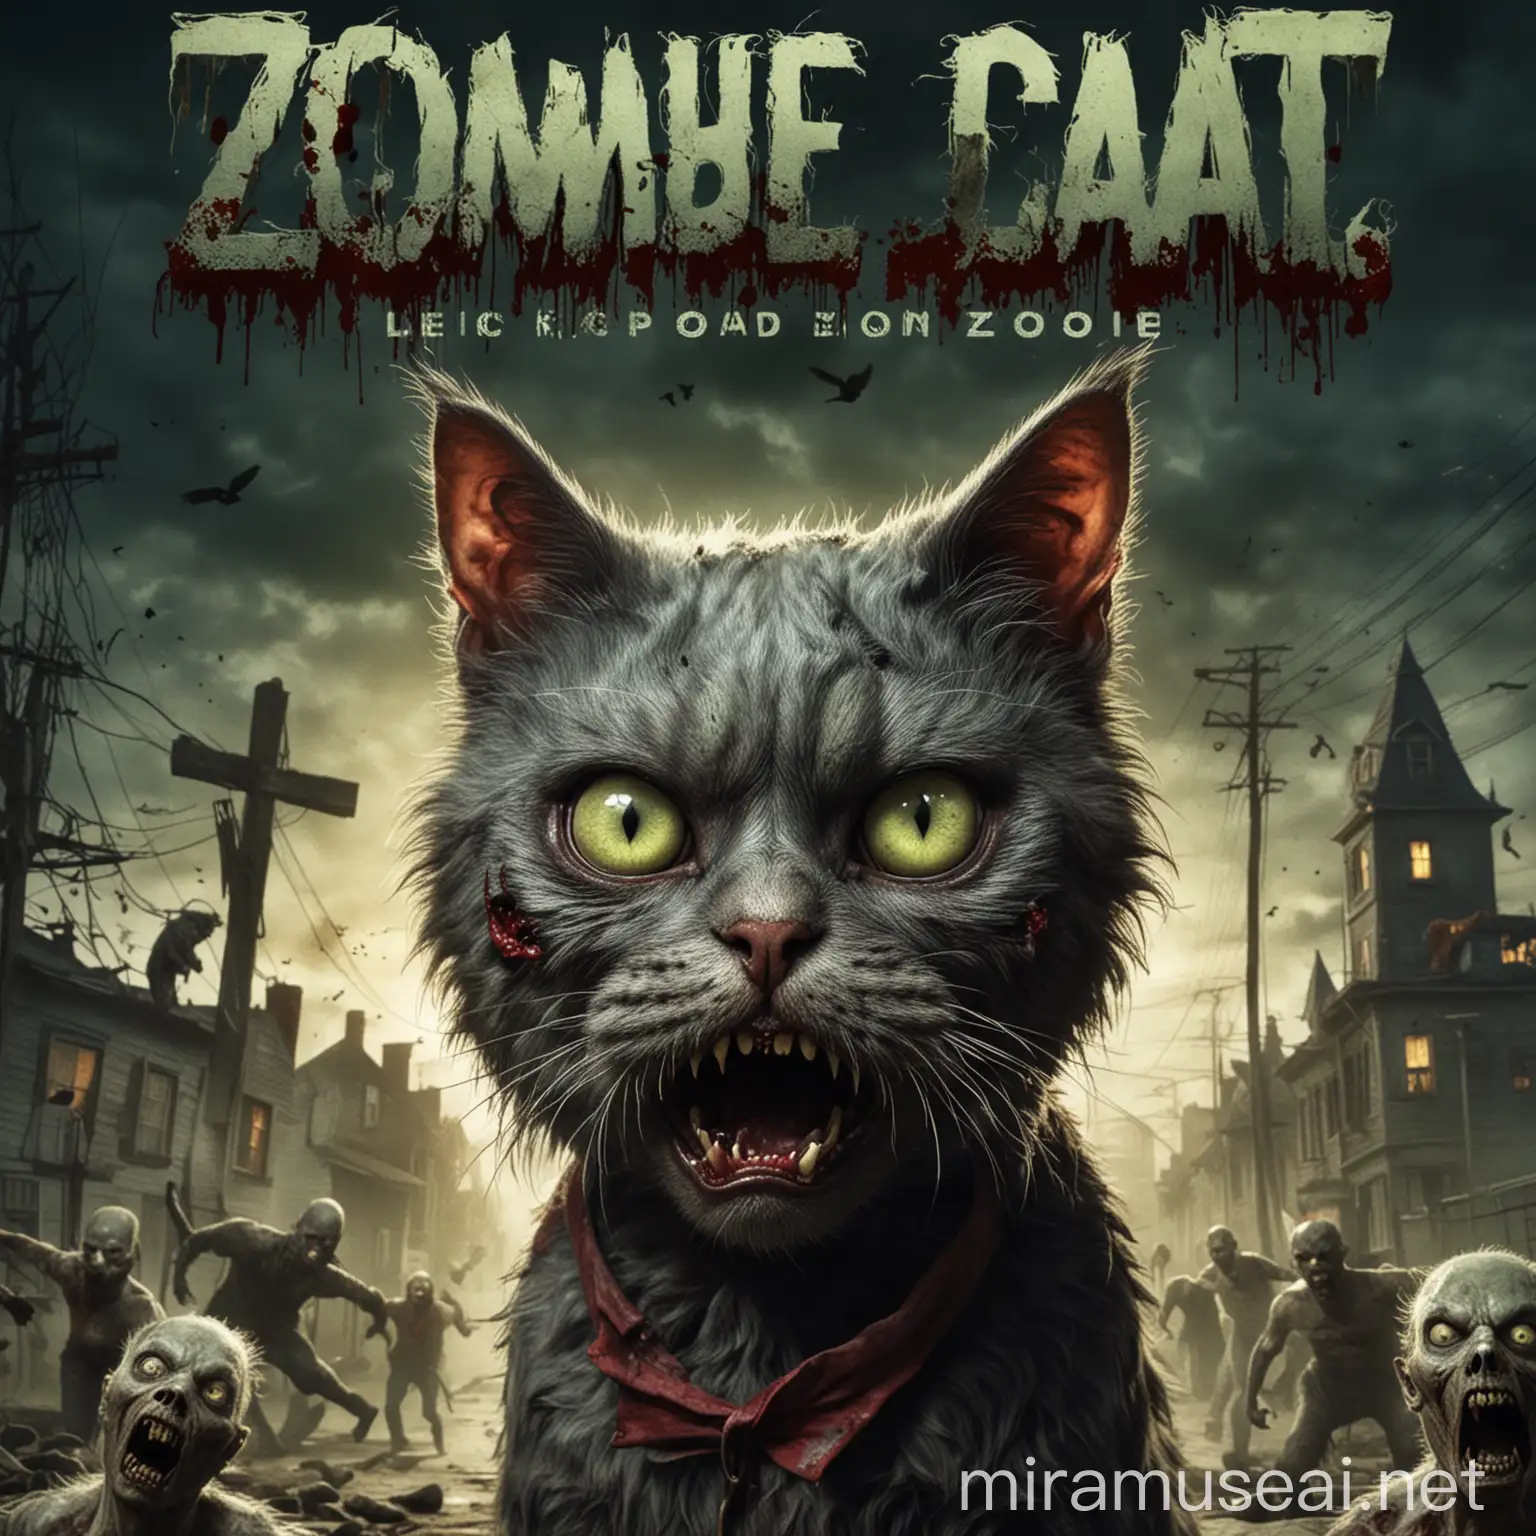 Terrifying Zombie Cat for Movie Cover